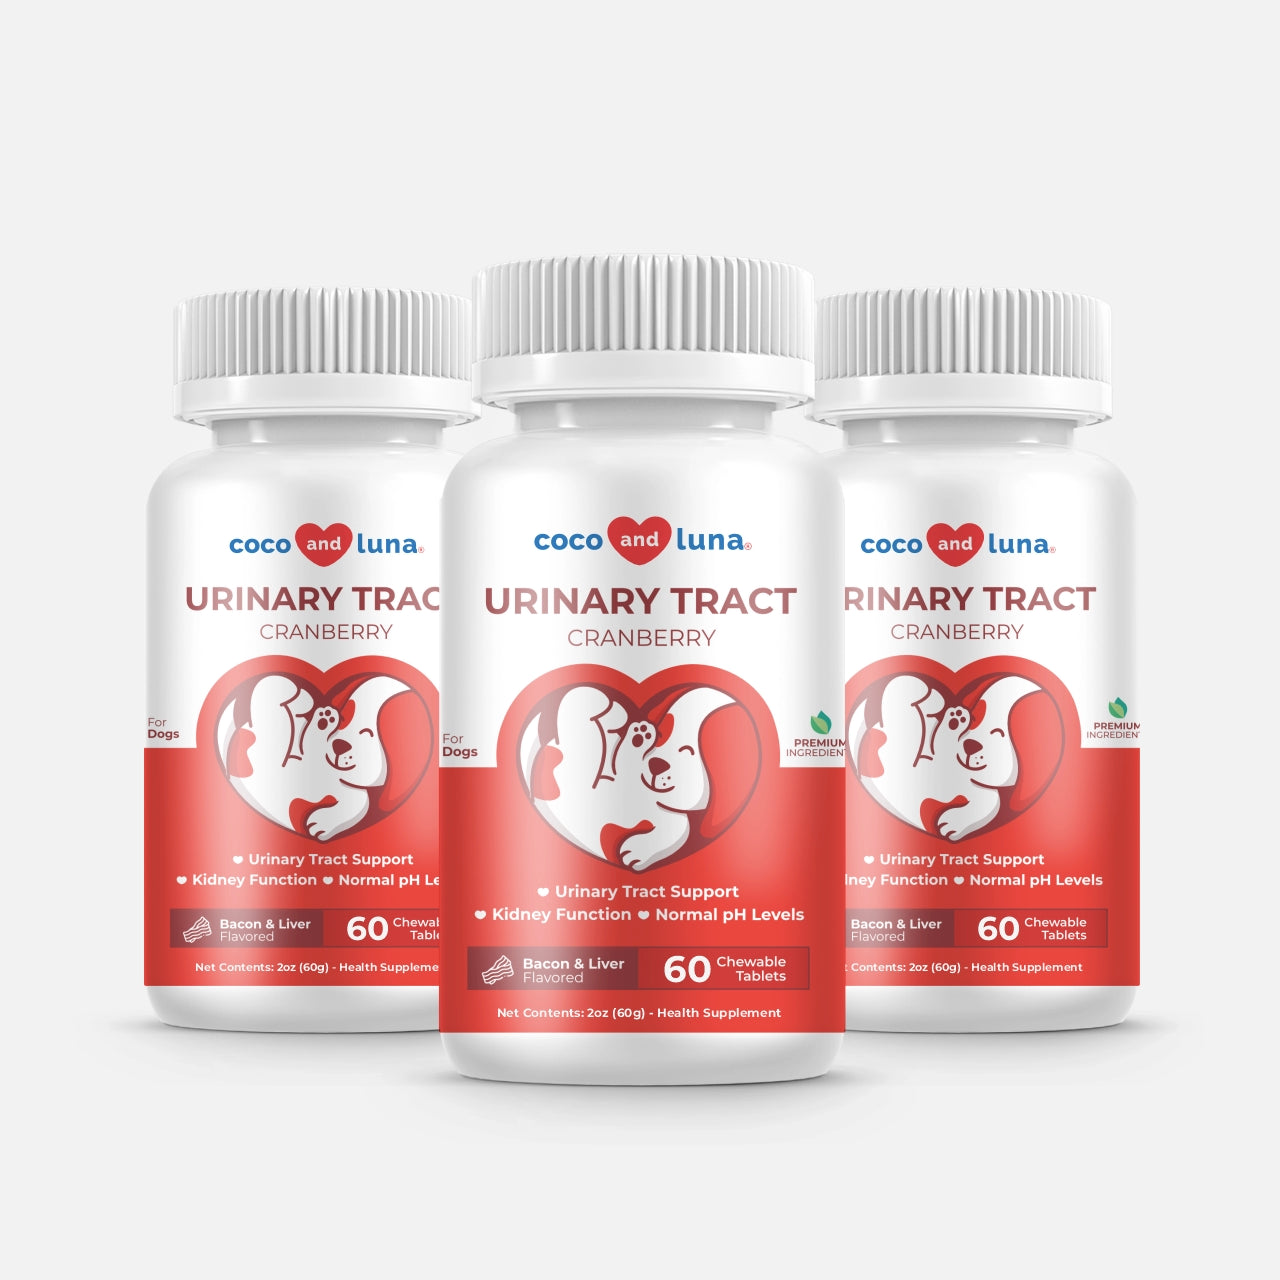 Urinary Tract Support for Dogs - 3 Pack 60 Tablets - Coco and Luna